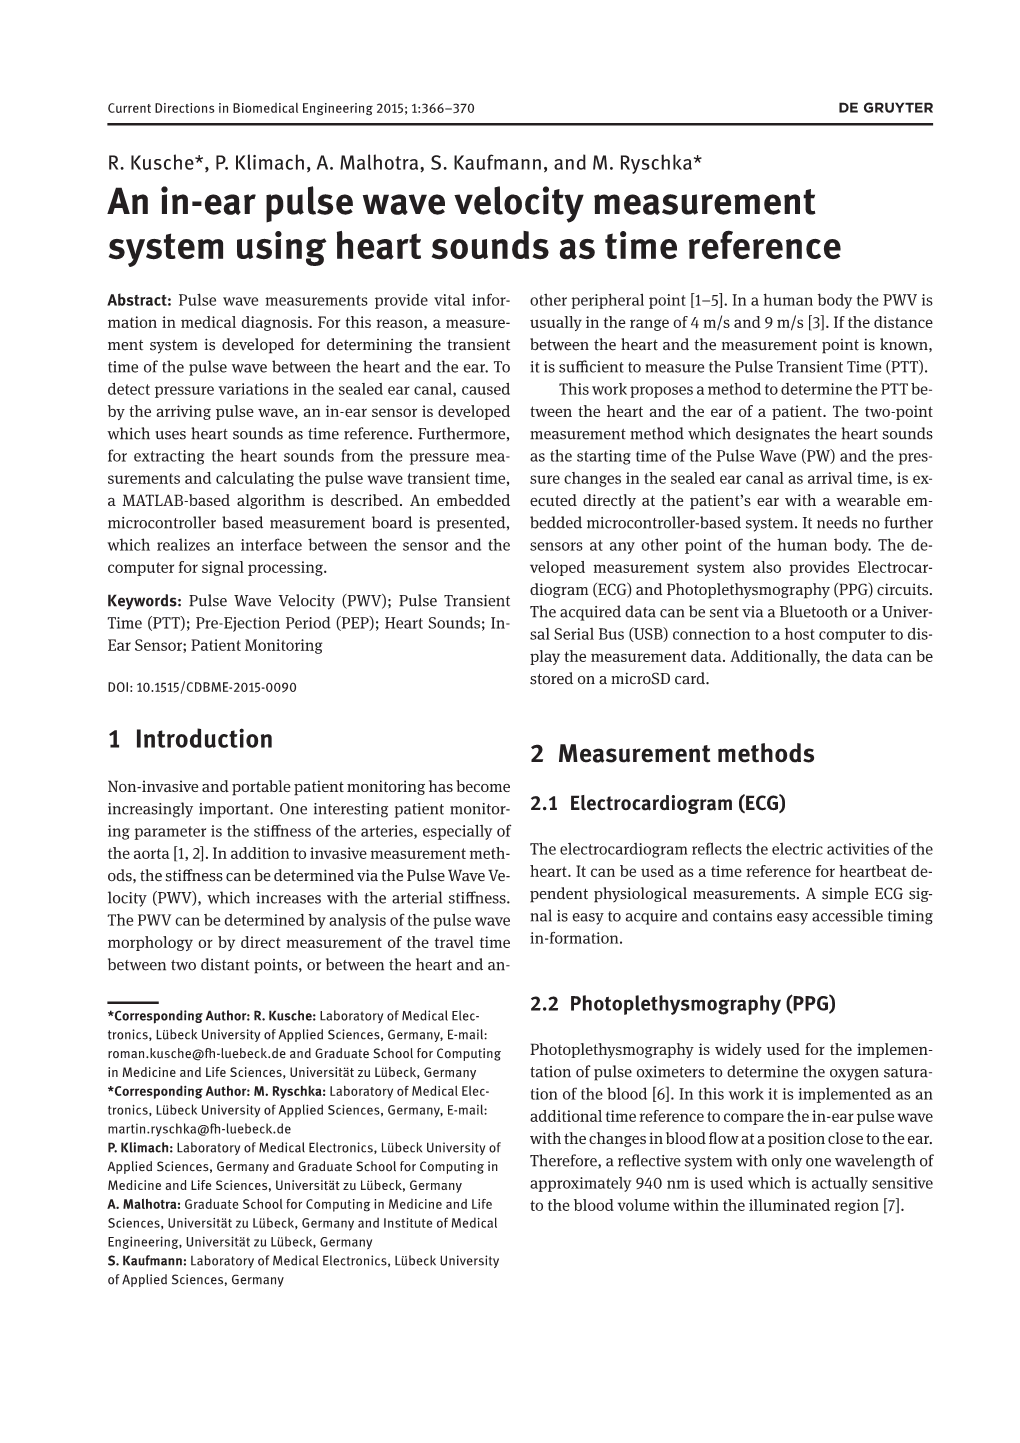 An In-Ear Pulse Wave Velocity Measurement System Using Heart Sounds As Time Reference